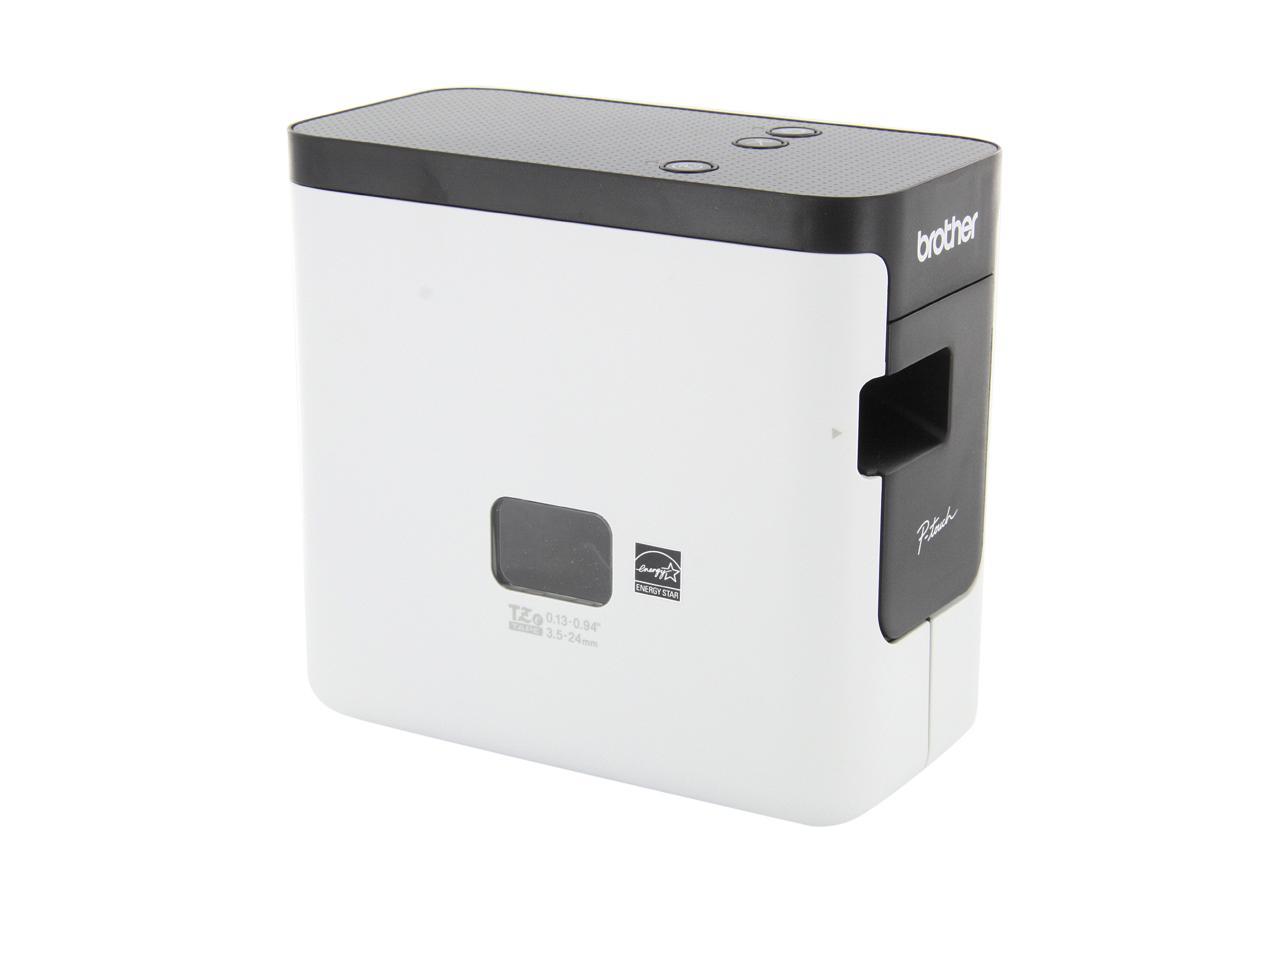 transfusion Windswept melodisk Brother P-touch PT-P700 PC-Connectable Label Printer for PC and Mac,  Thermal Transfer, 180 x 360 dpi, 30mm./sec, Up to 4 Print Lines, Auto  Cutter, Barcode Printing, USB - Newegg.com